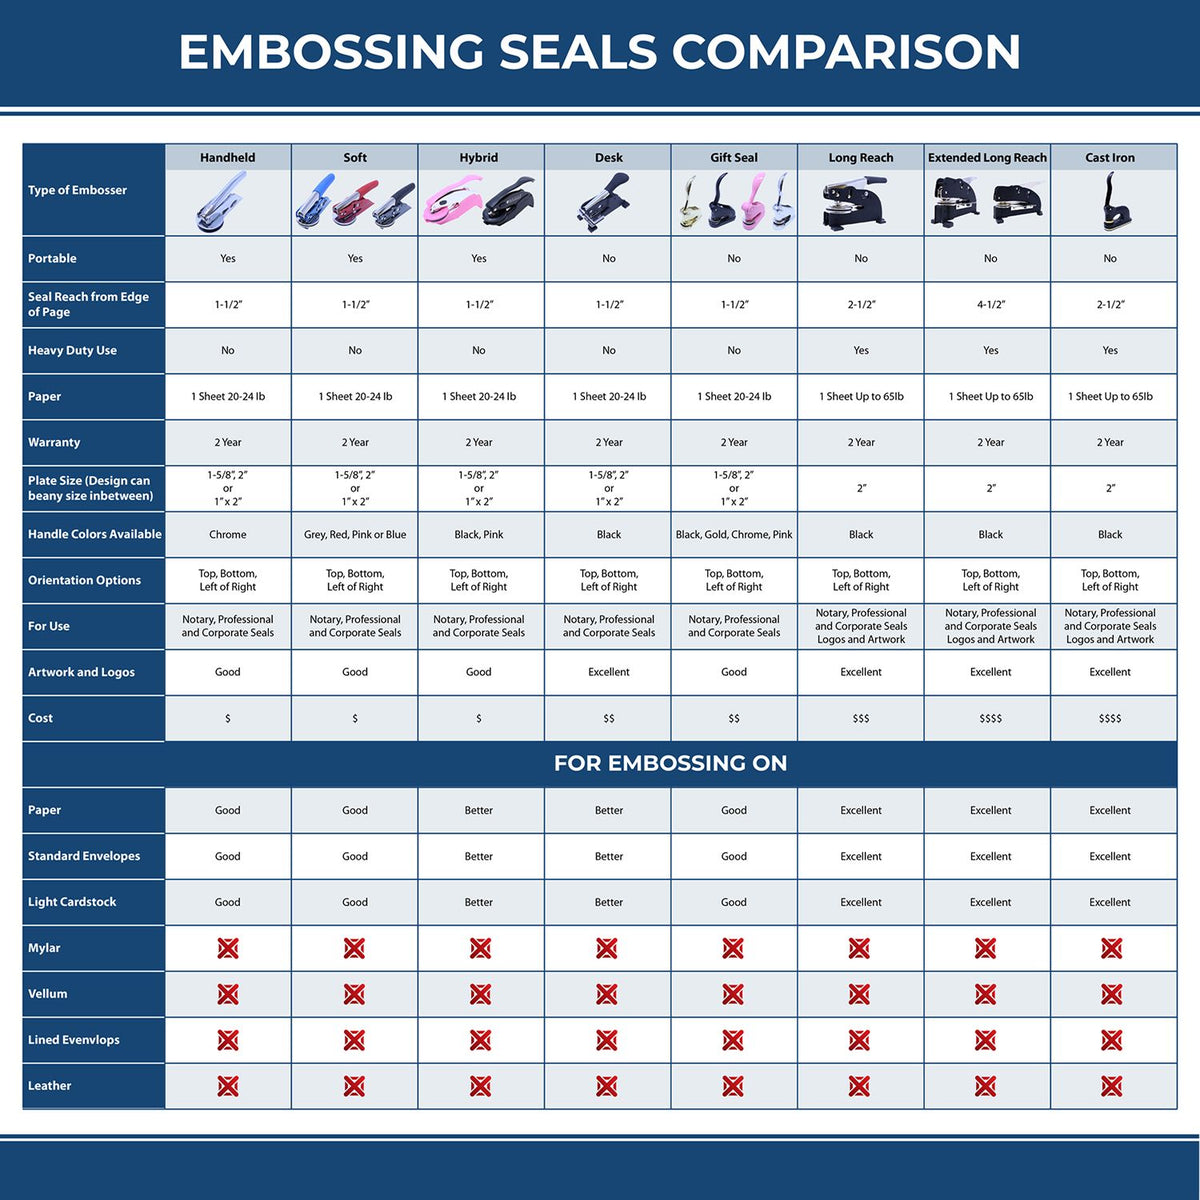 A comparison chart for the different types of mount models available for the State of Alaska Extended Long Reach Geologist Seal